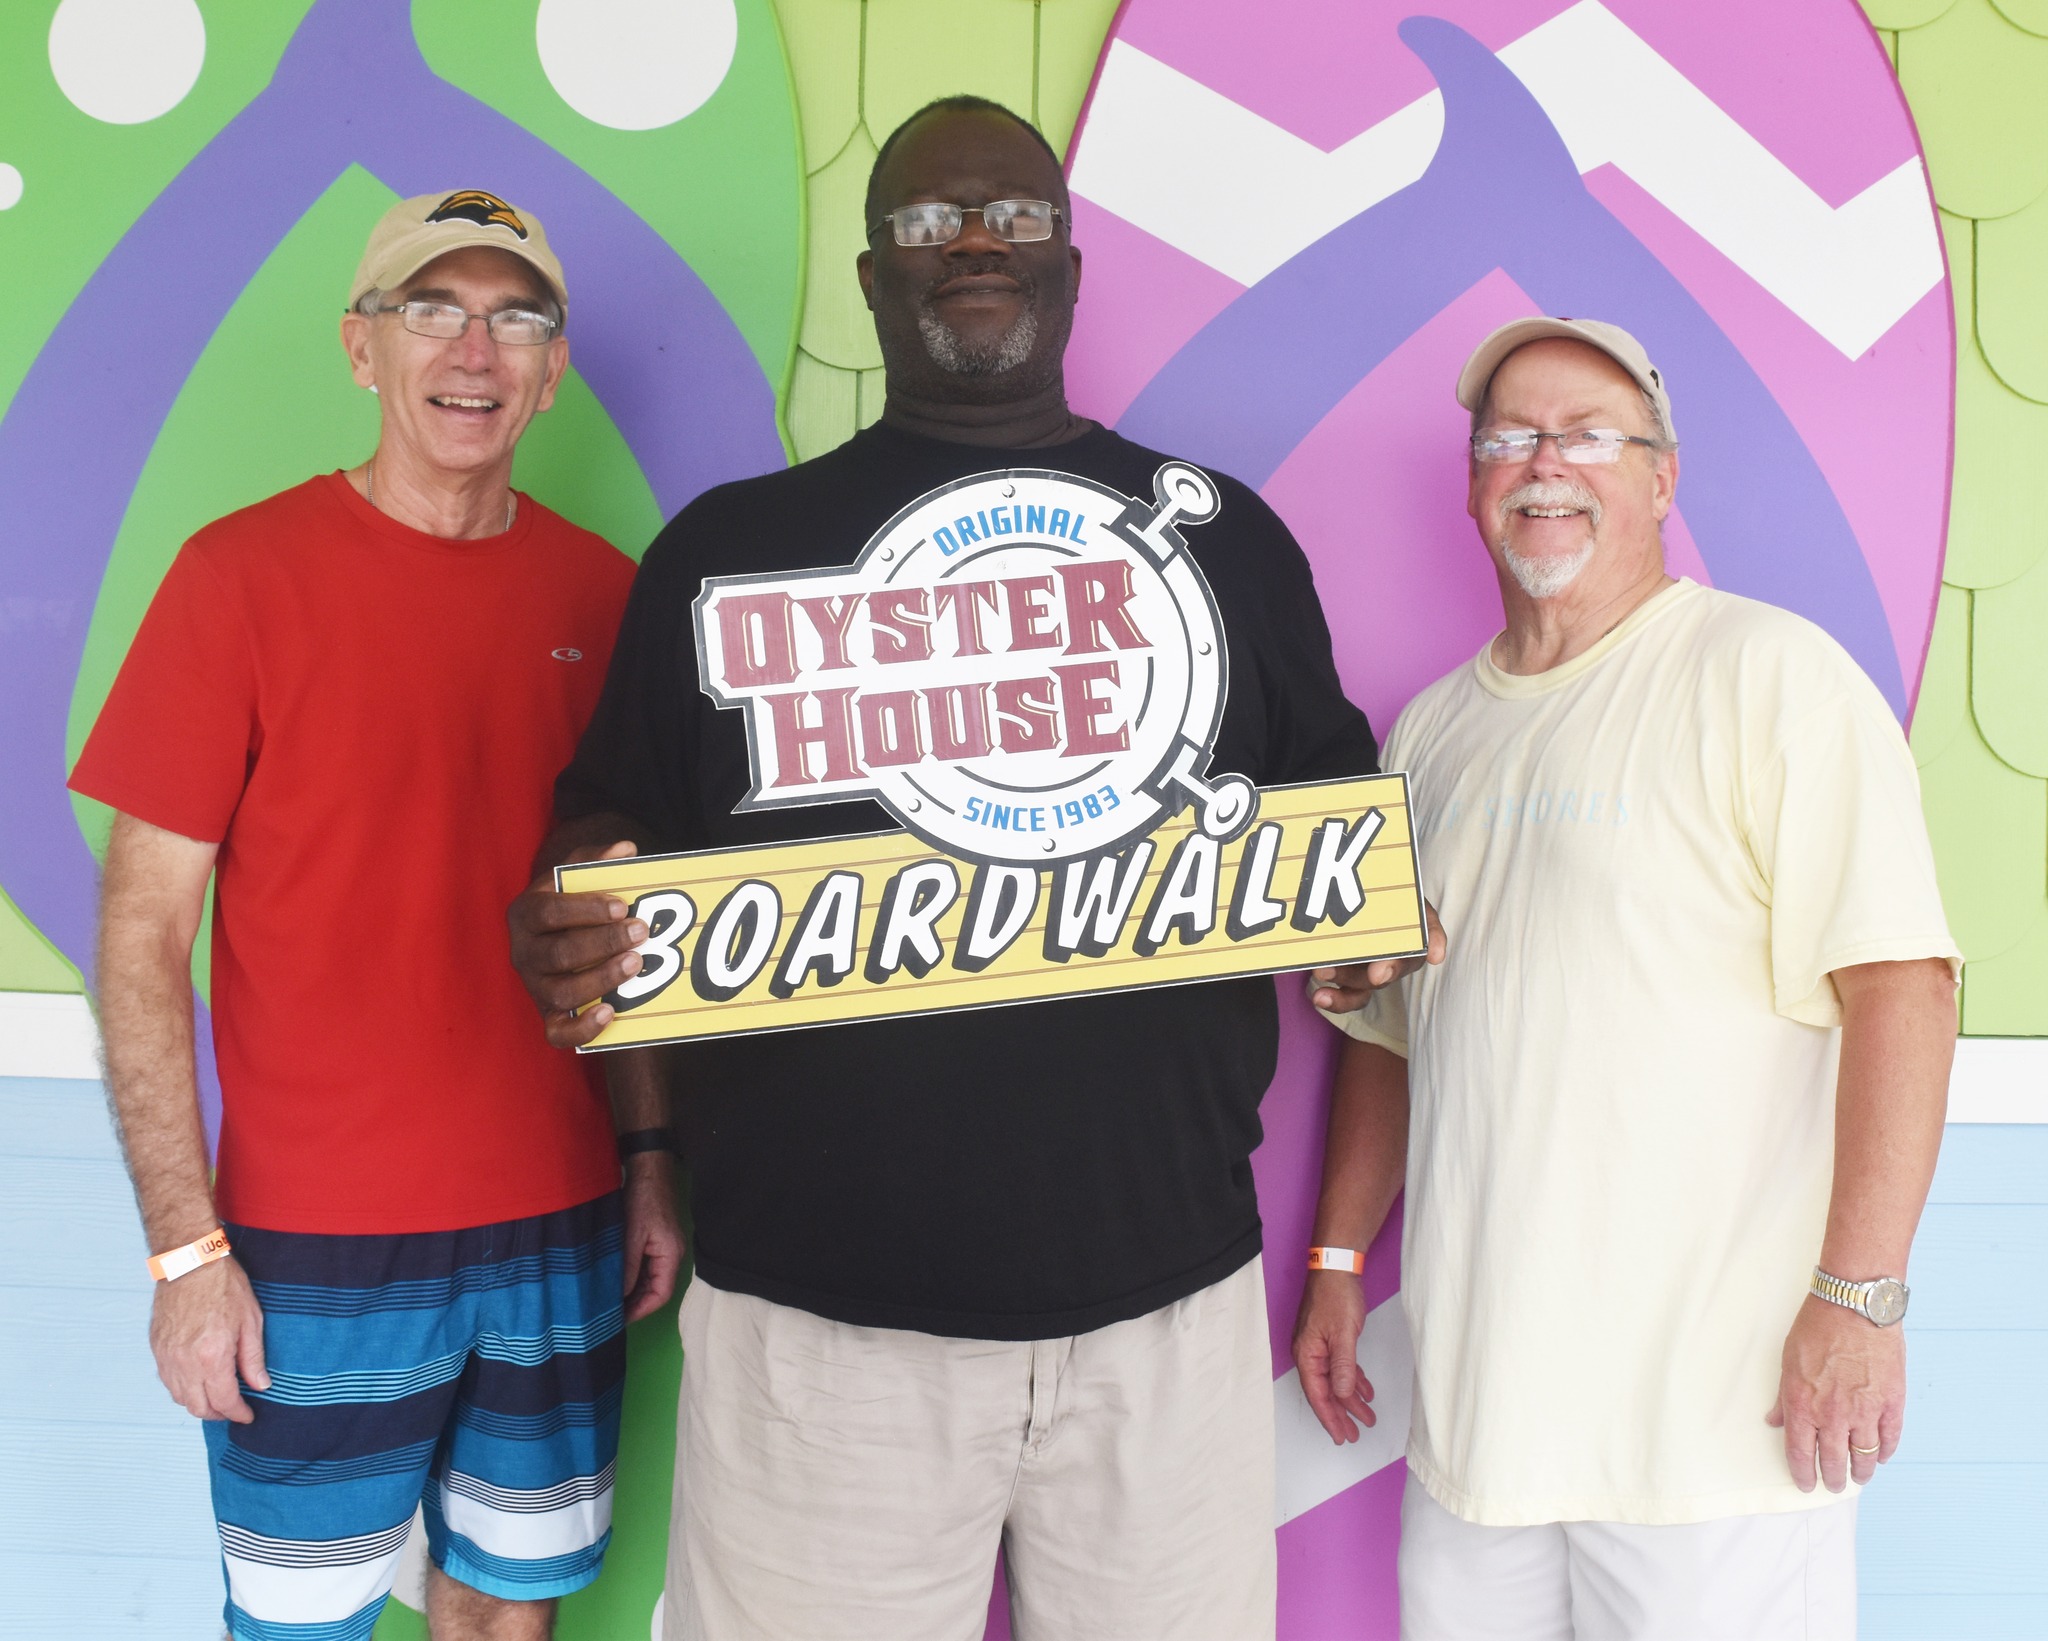 Cedric Hudson (center) of the Mobile Causeway Original Oyster House is the longest tenured employee of the restaurants. Cedric is pictured with from left Jim Harrison, GM of the Mobile Causeway and Bud Morris, GM of Gulf Shores.